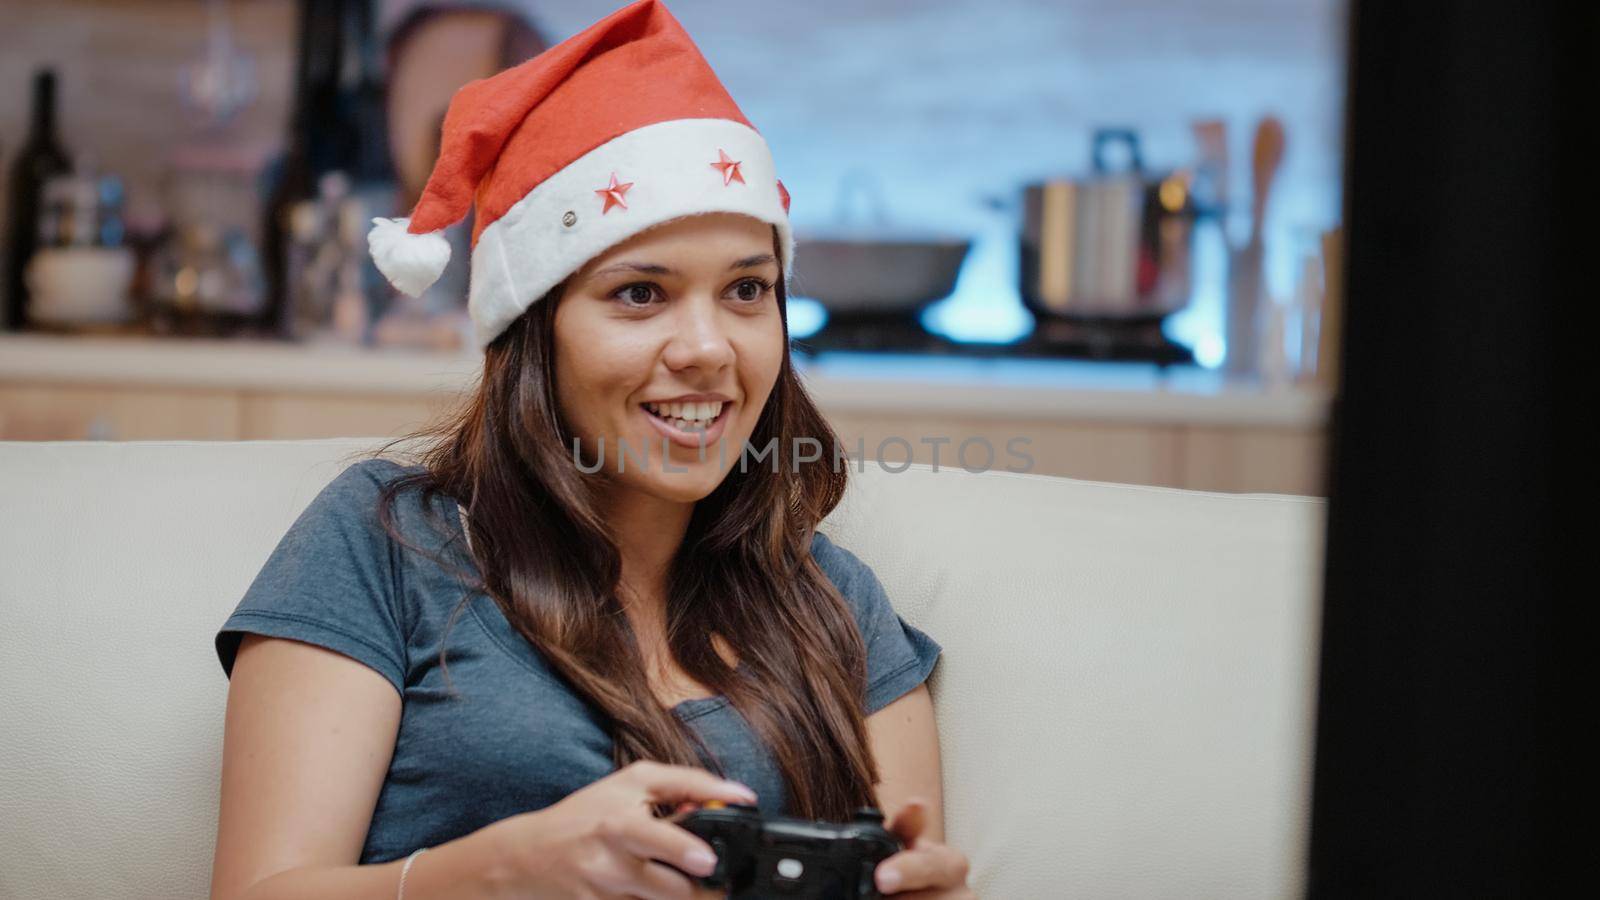 Person with santa hat winning video games with joystick on console at home. Festive woman playing games online feeling cheerful using controller and television to celebrate christmas eve